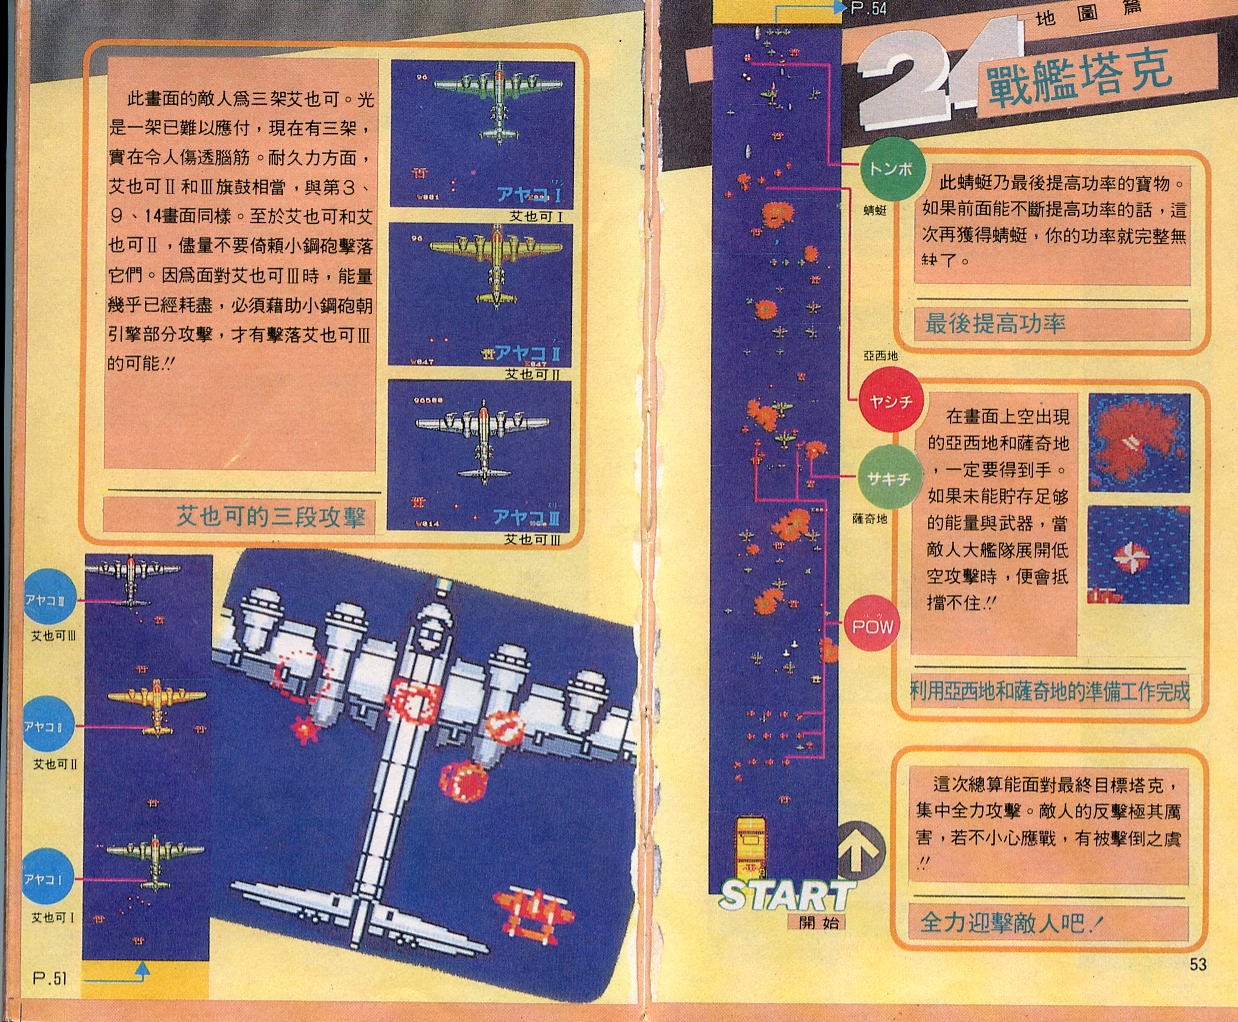 1943 The Battle of Midway Official guide (pirate version in Taiwan) 27